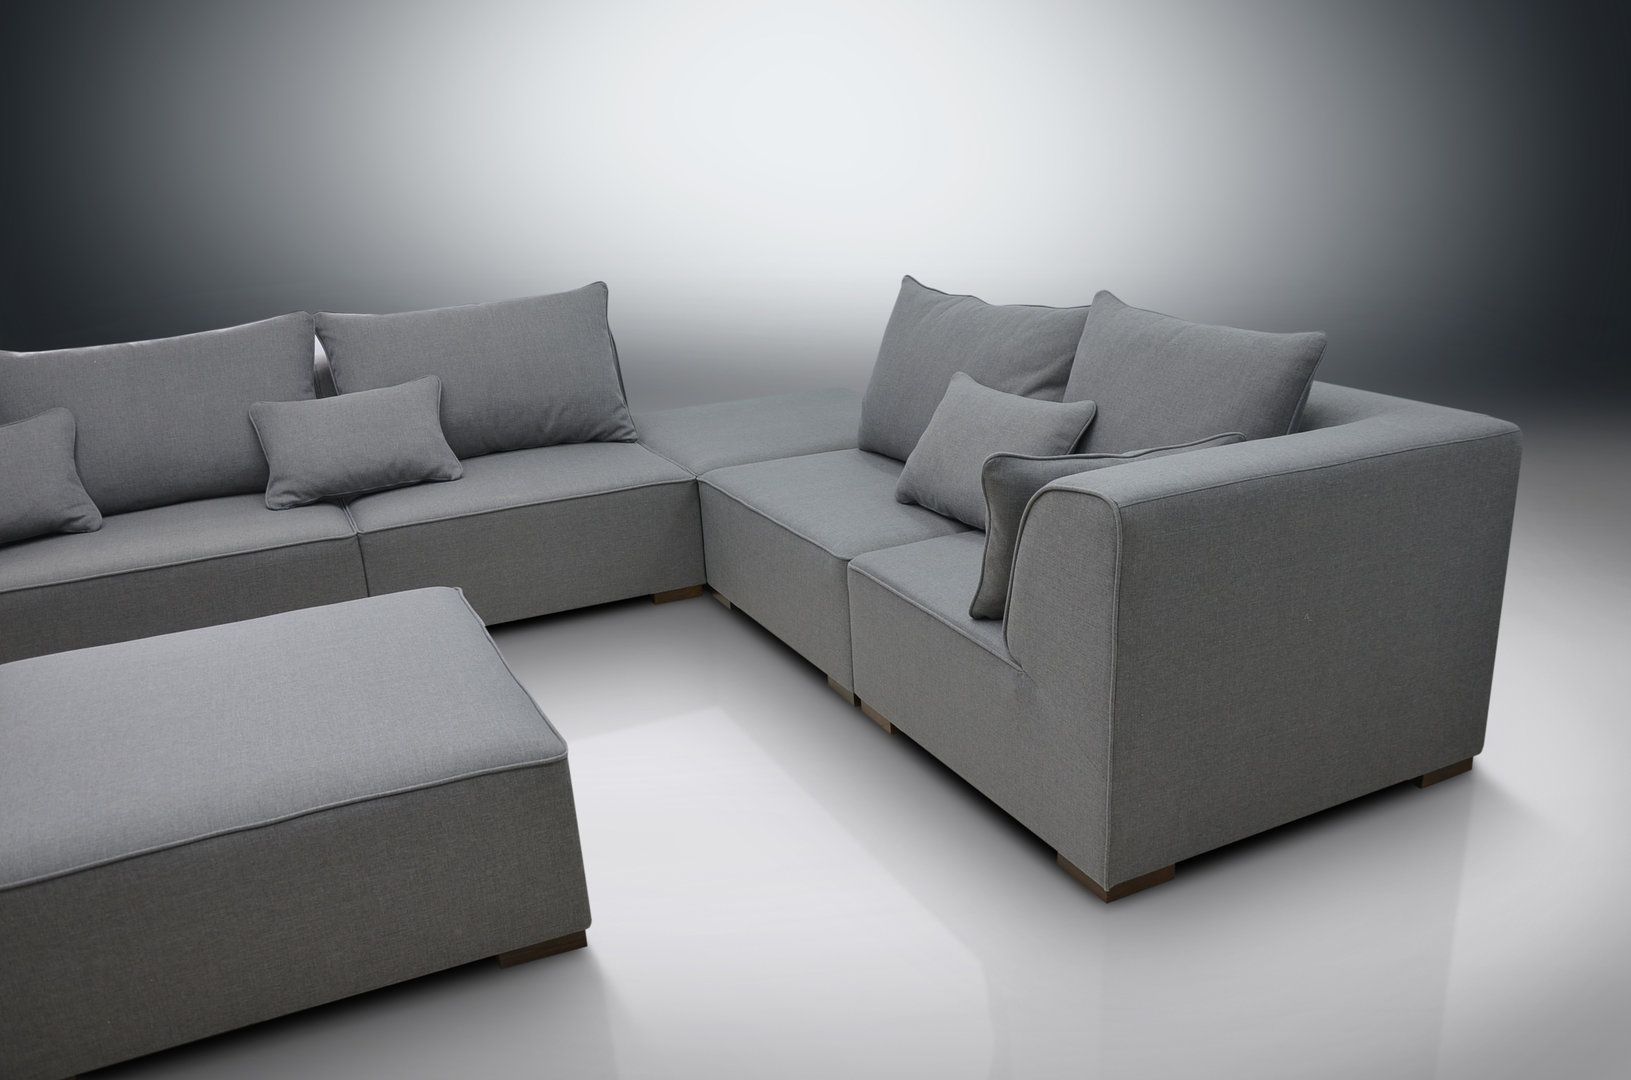 Modular Sofa Primo, 2Xcorners, 3Xchairs, 2Xfootstools Throughout Dream Navy 3 Piece Modular Sofas (View 12 of 15)